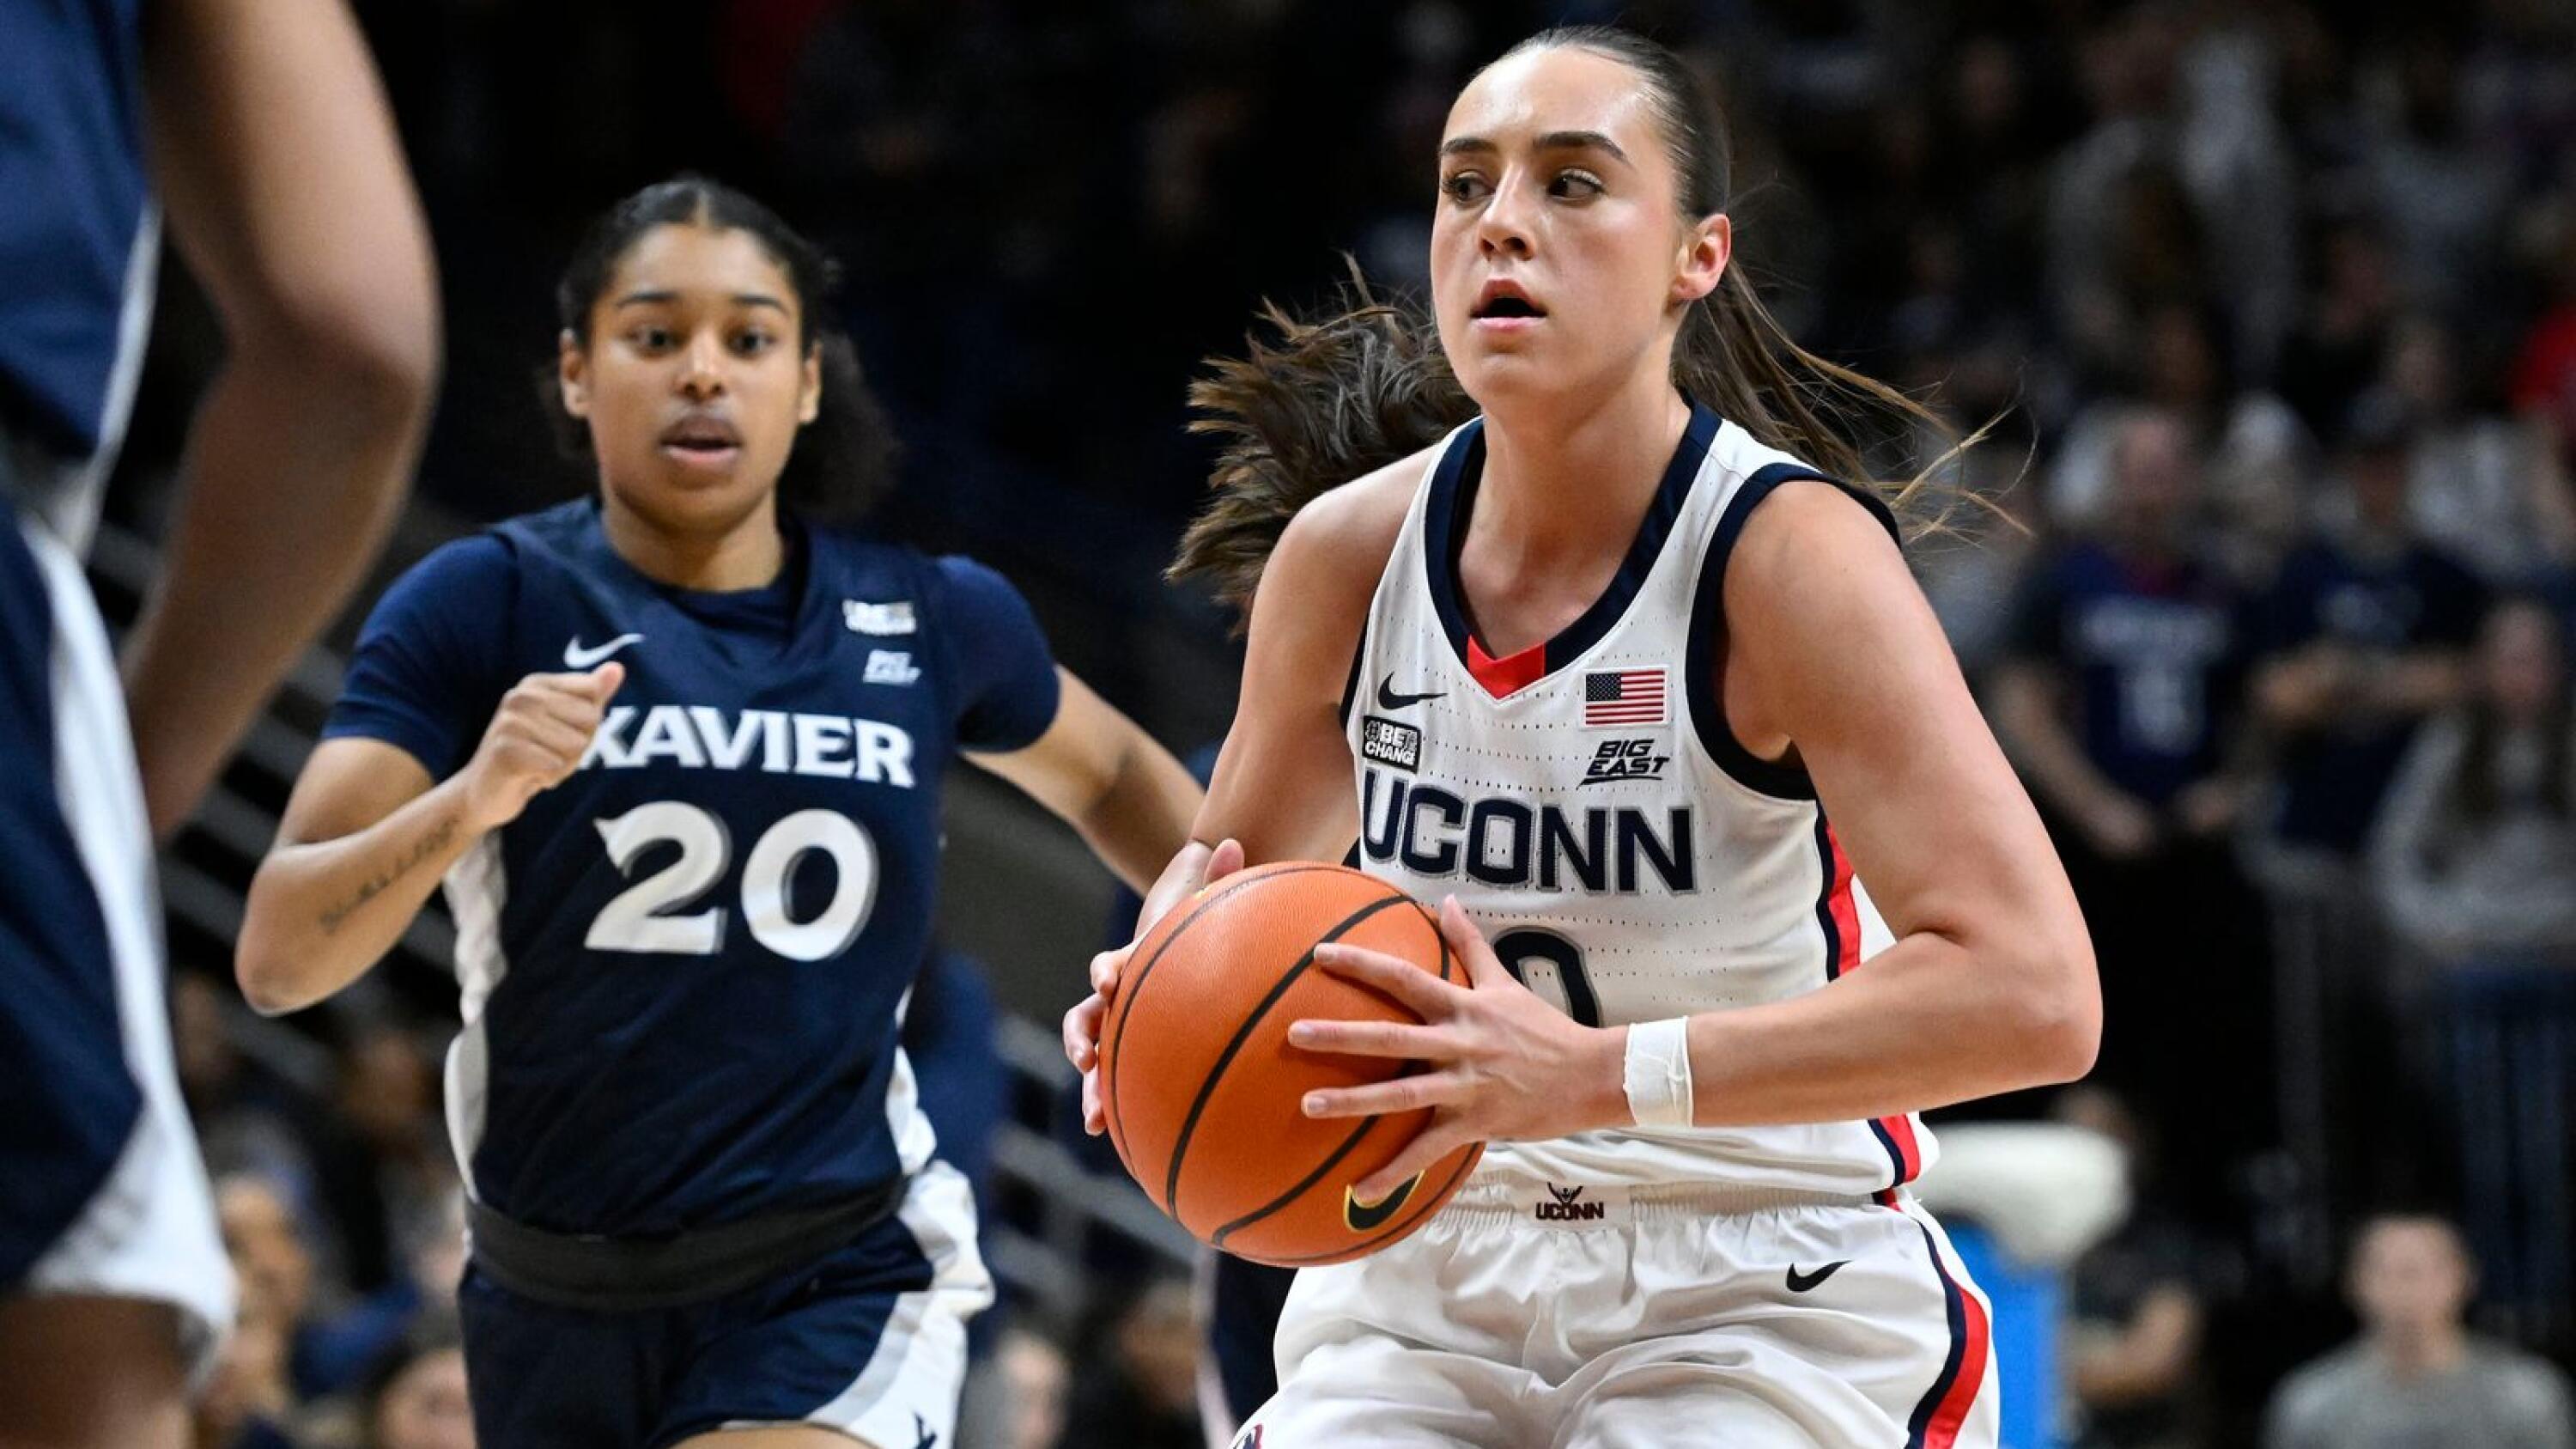 She's not Sue Bird, but Nika Muhl is leading UConn into the Big East tourney just the same